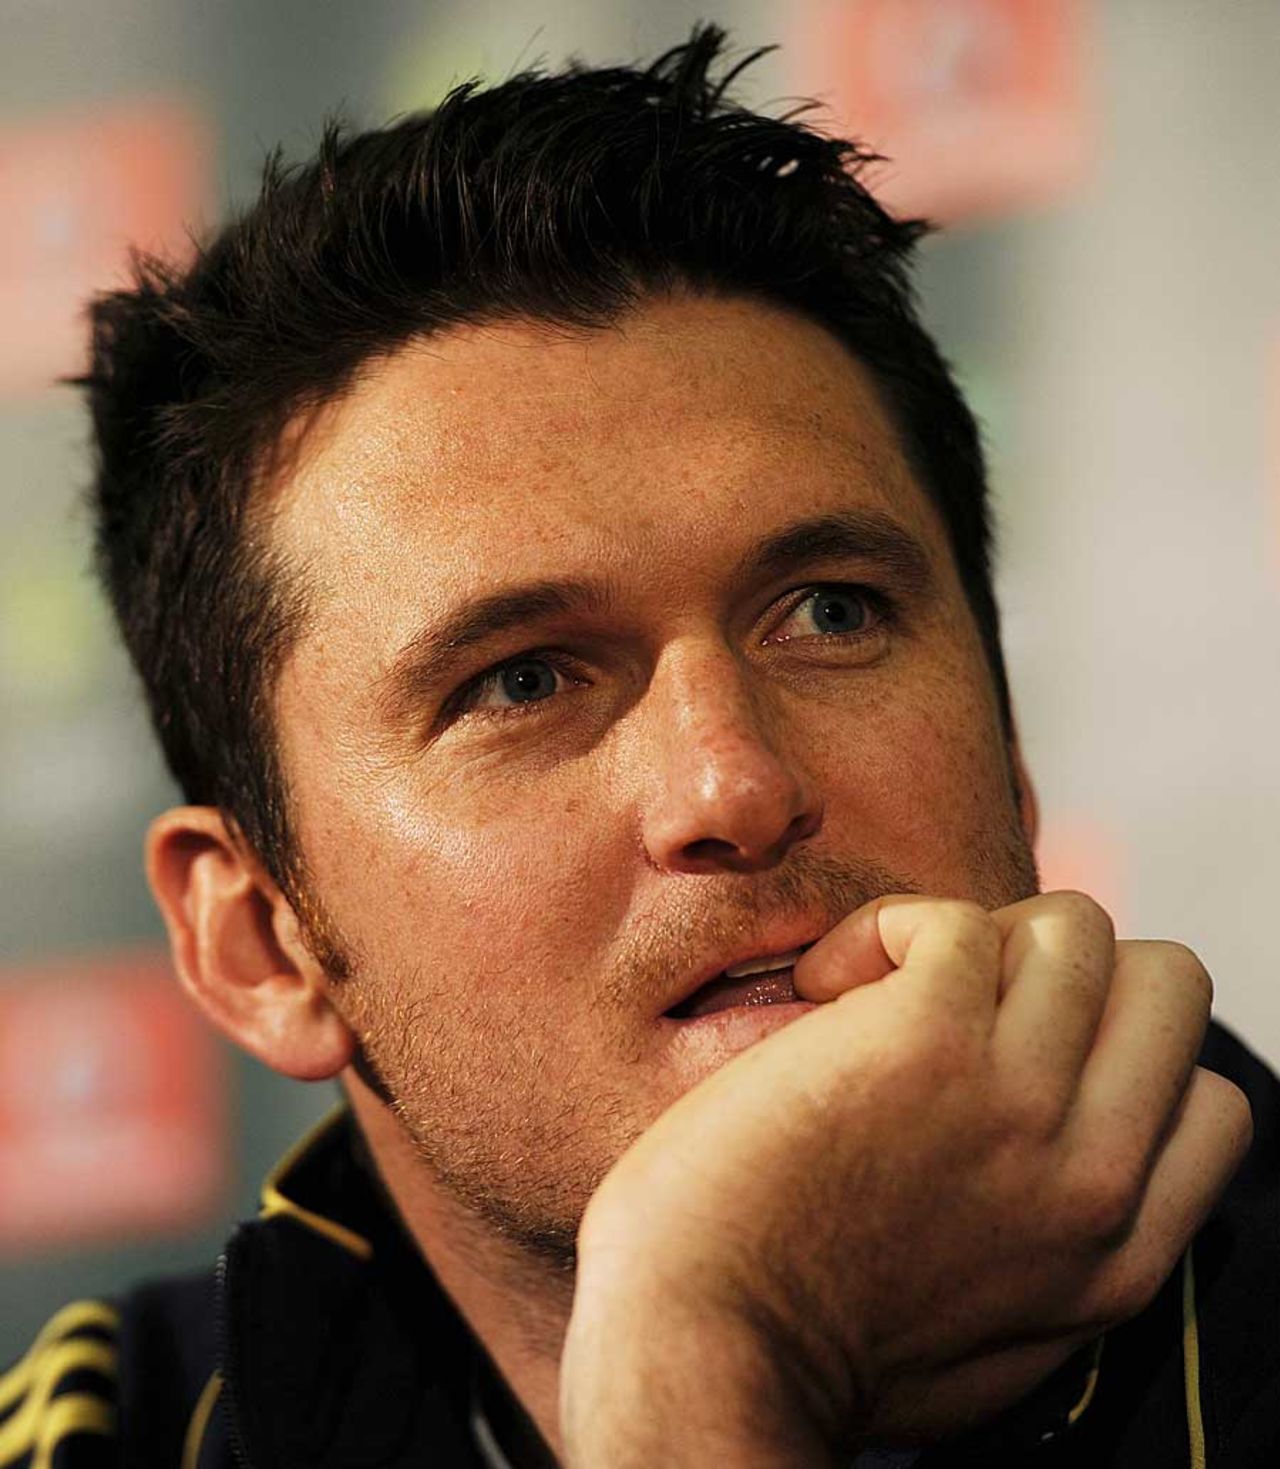 Graeme Smith at a press conference on the eve of the Perth Test, Perth, November 29, 2012